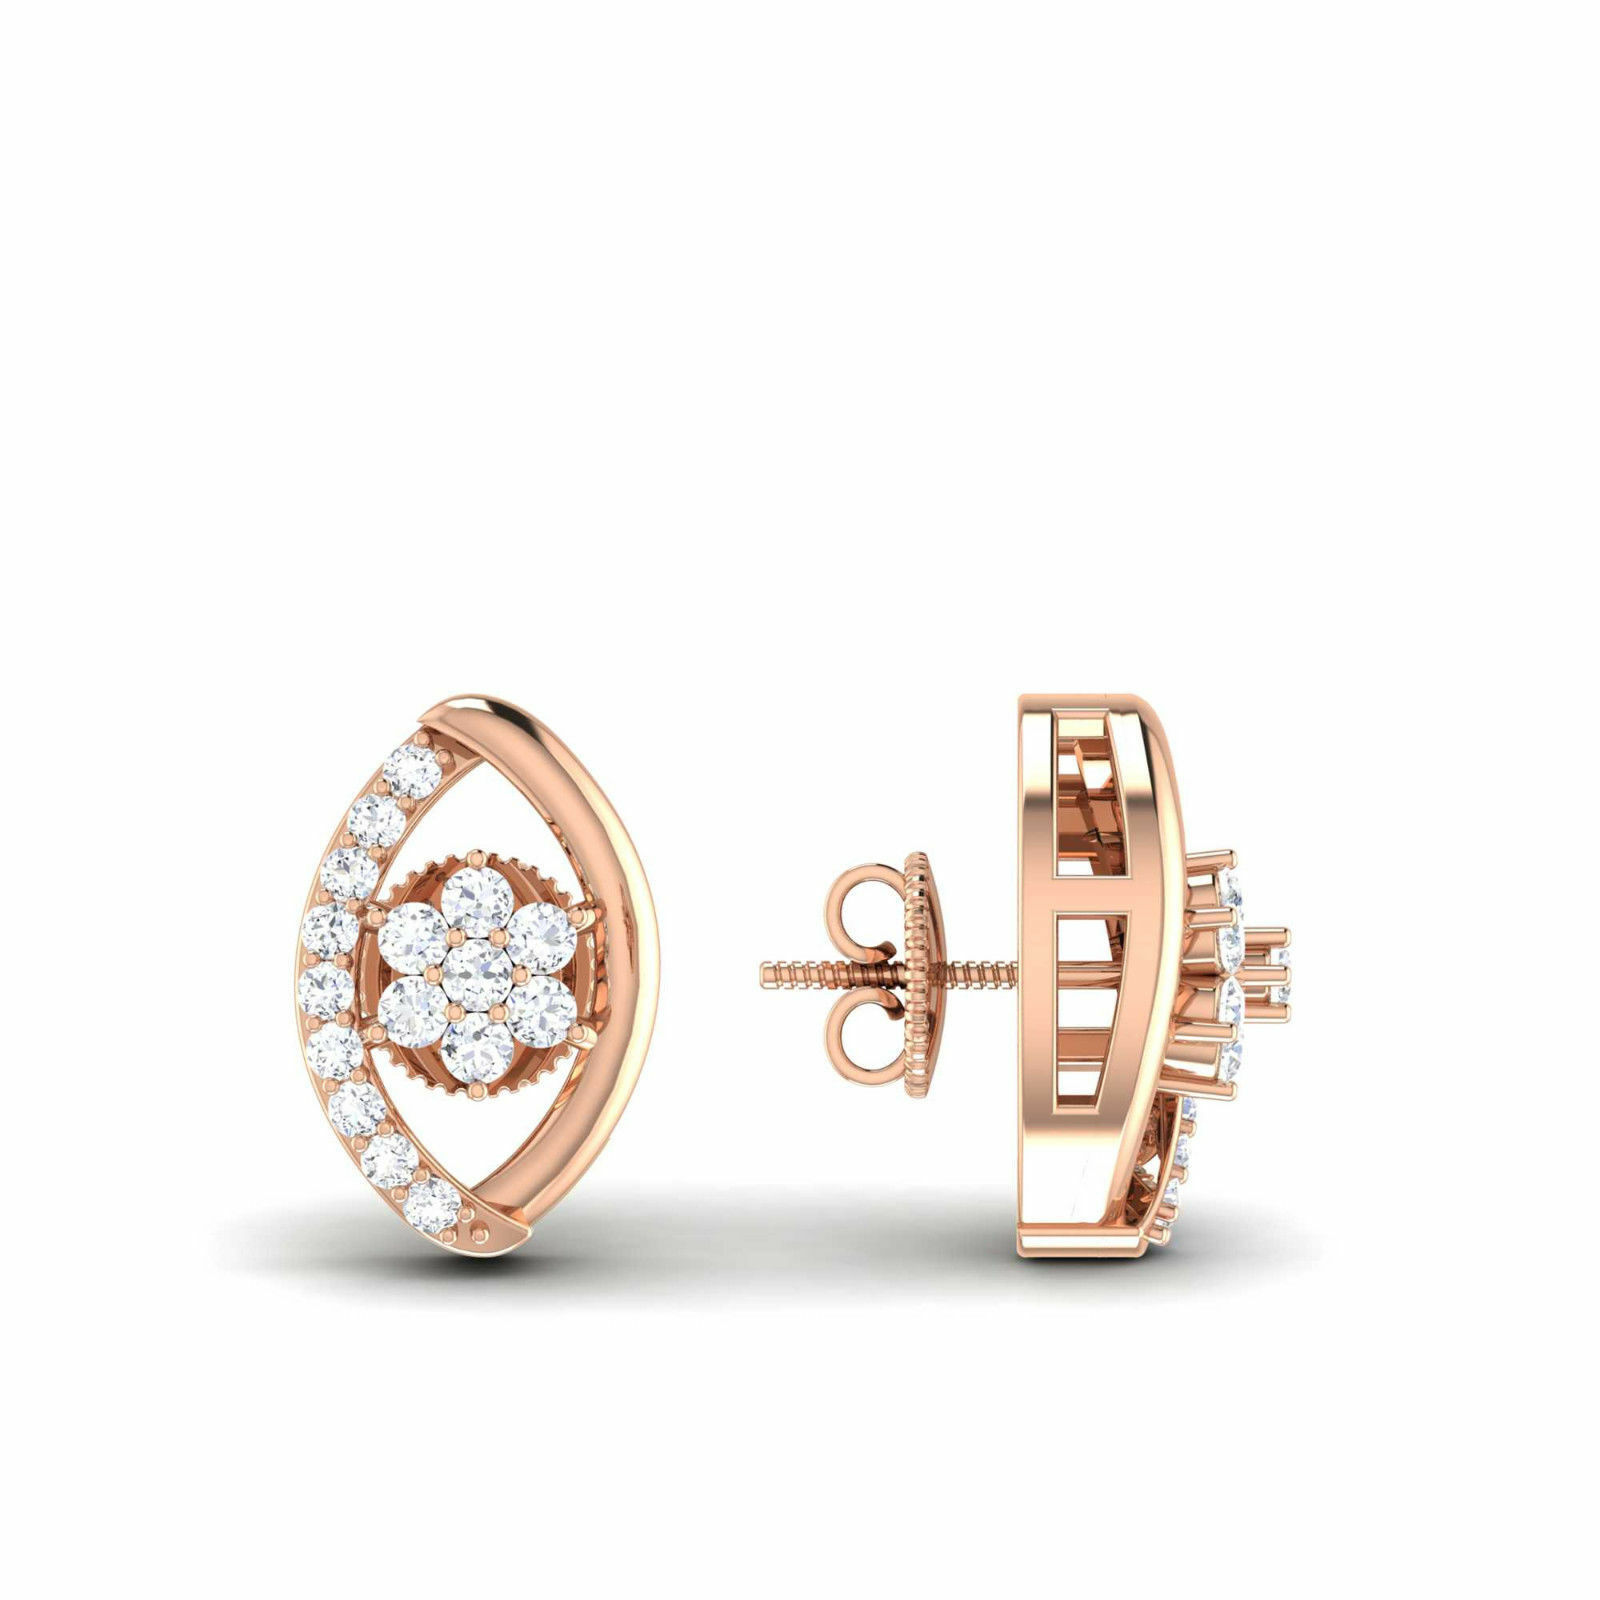 Details about   0.94 Ct Round Cut Solitaire Stud Earrings Hallmark Solid 14K Rose Gold